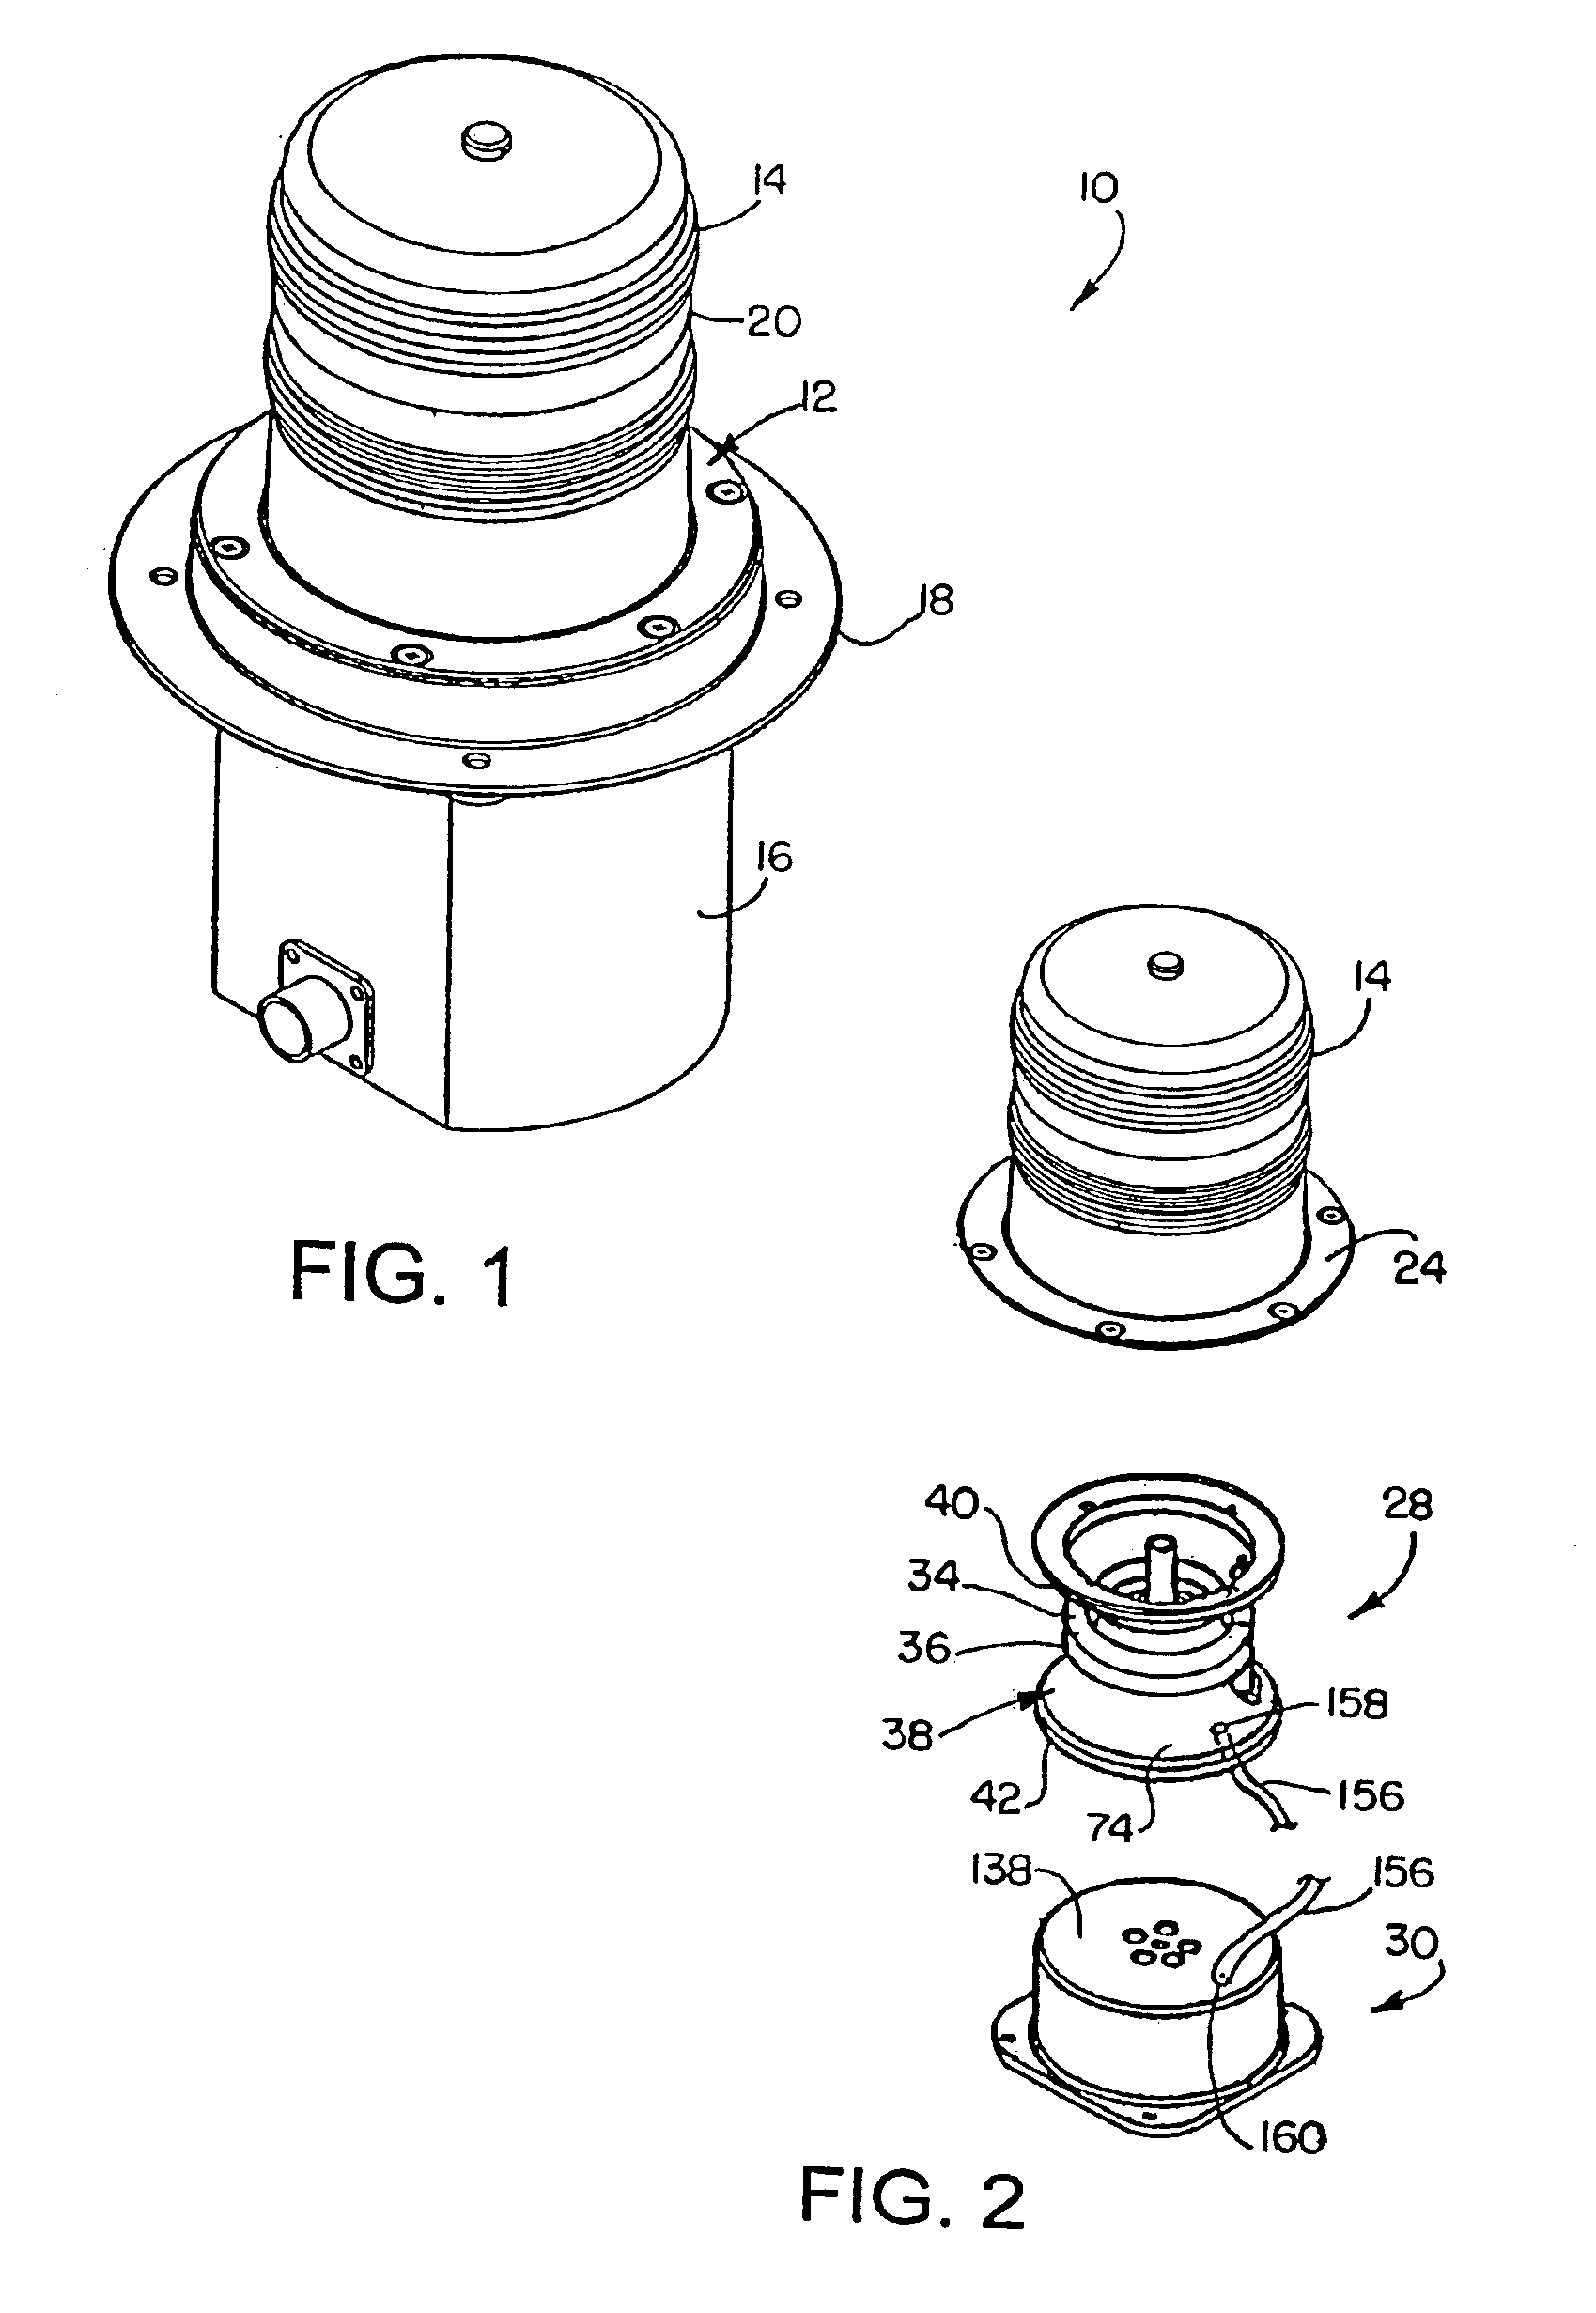 Recognition/anti-collision light for aircraft